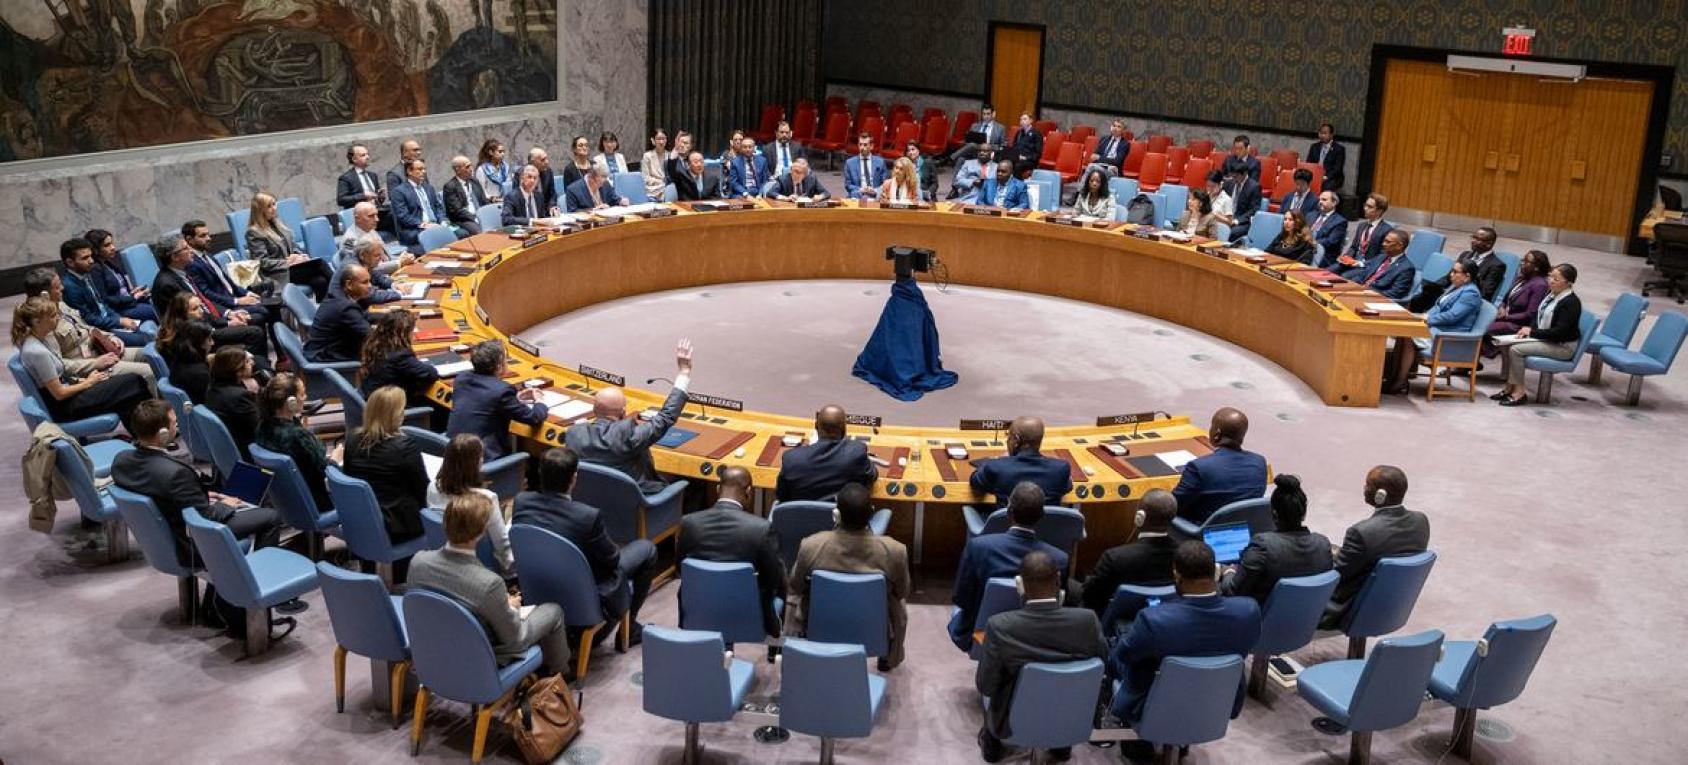 A circular table depicting the UN Security Council around which numerous people in suits are sitting and talking.